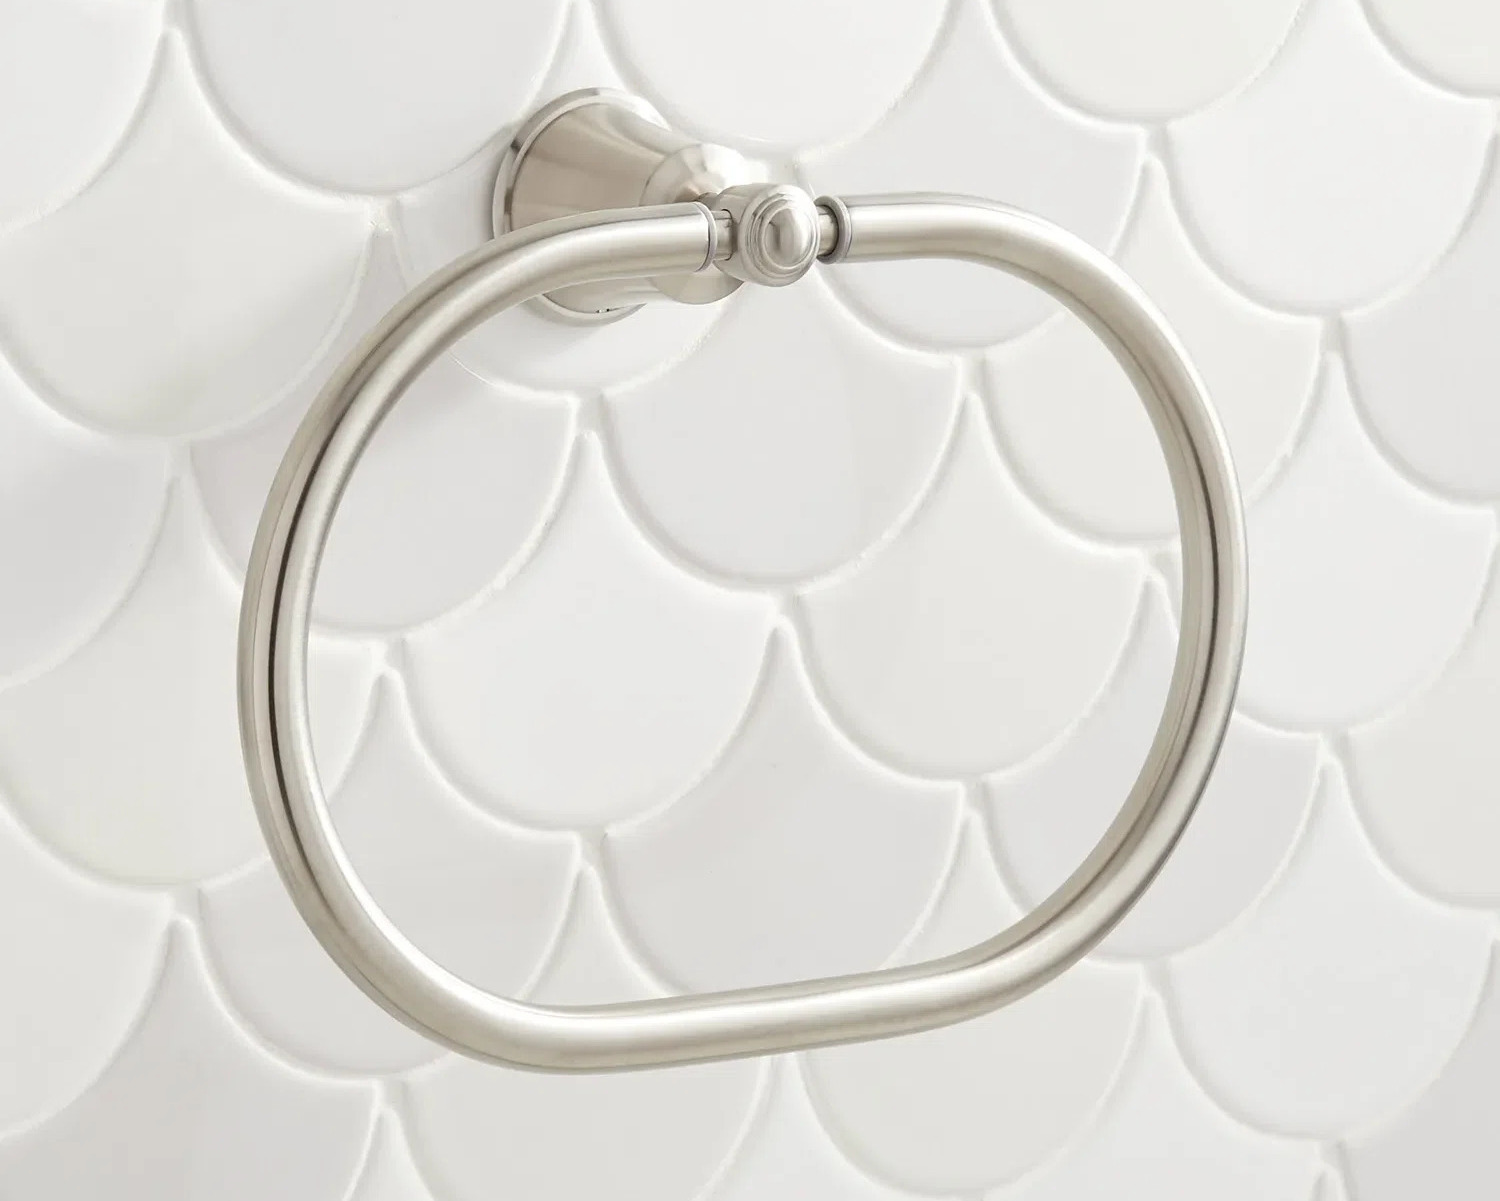 How To Mount A Towel Ring